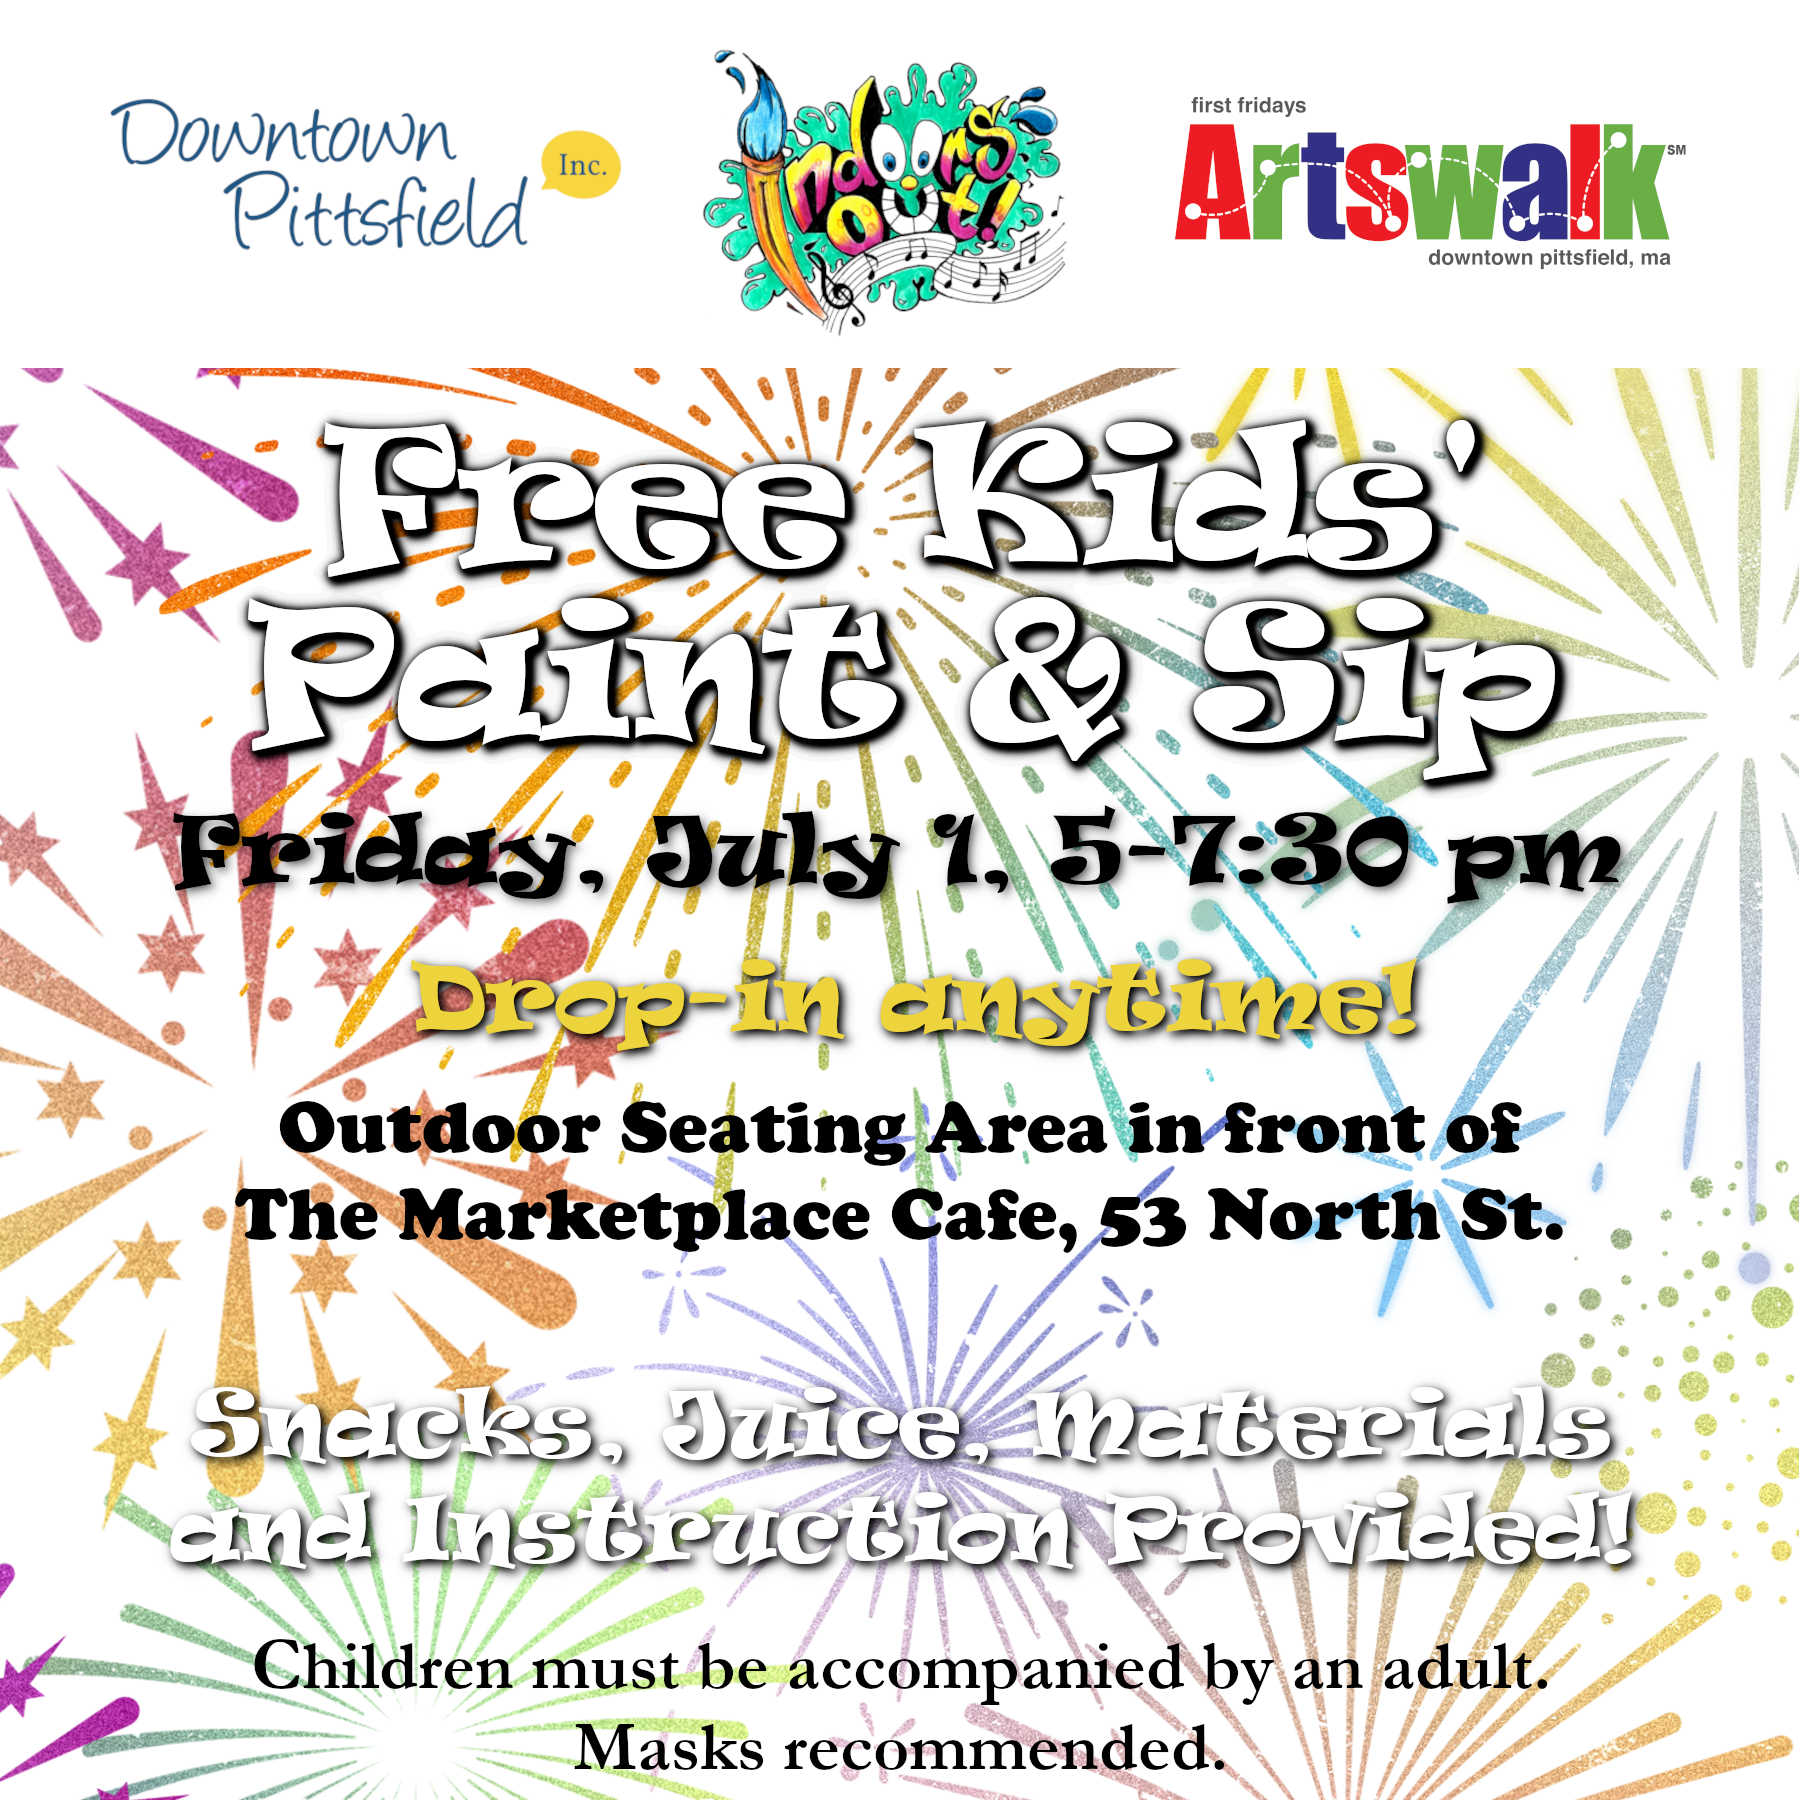 Indoors Out! Free Kids’ Paint & Sip, Friday, July 1, 5-7:30 pm